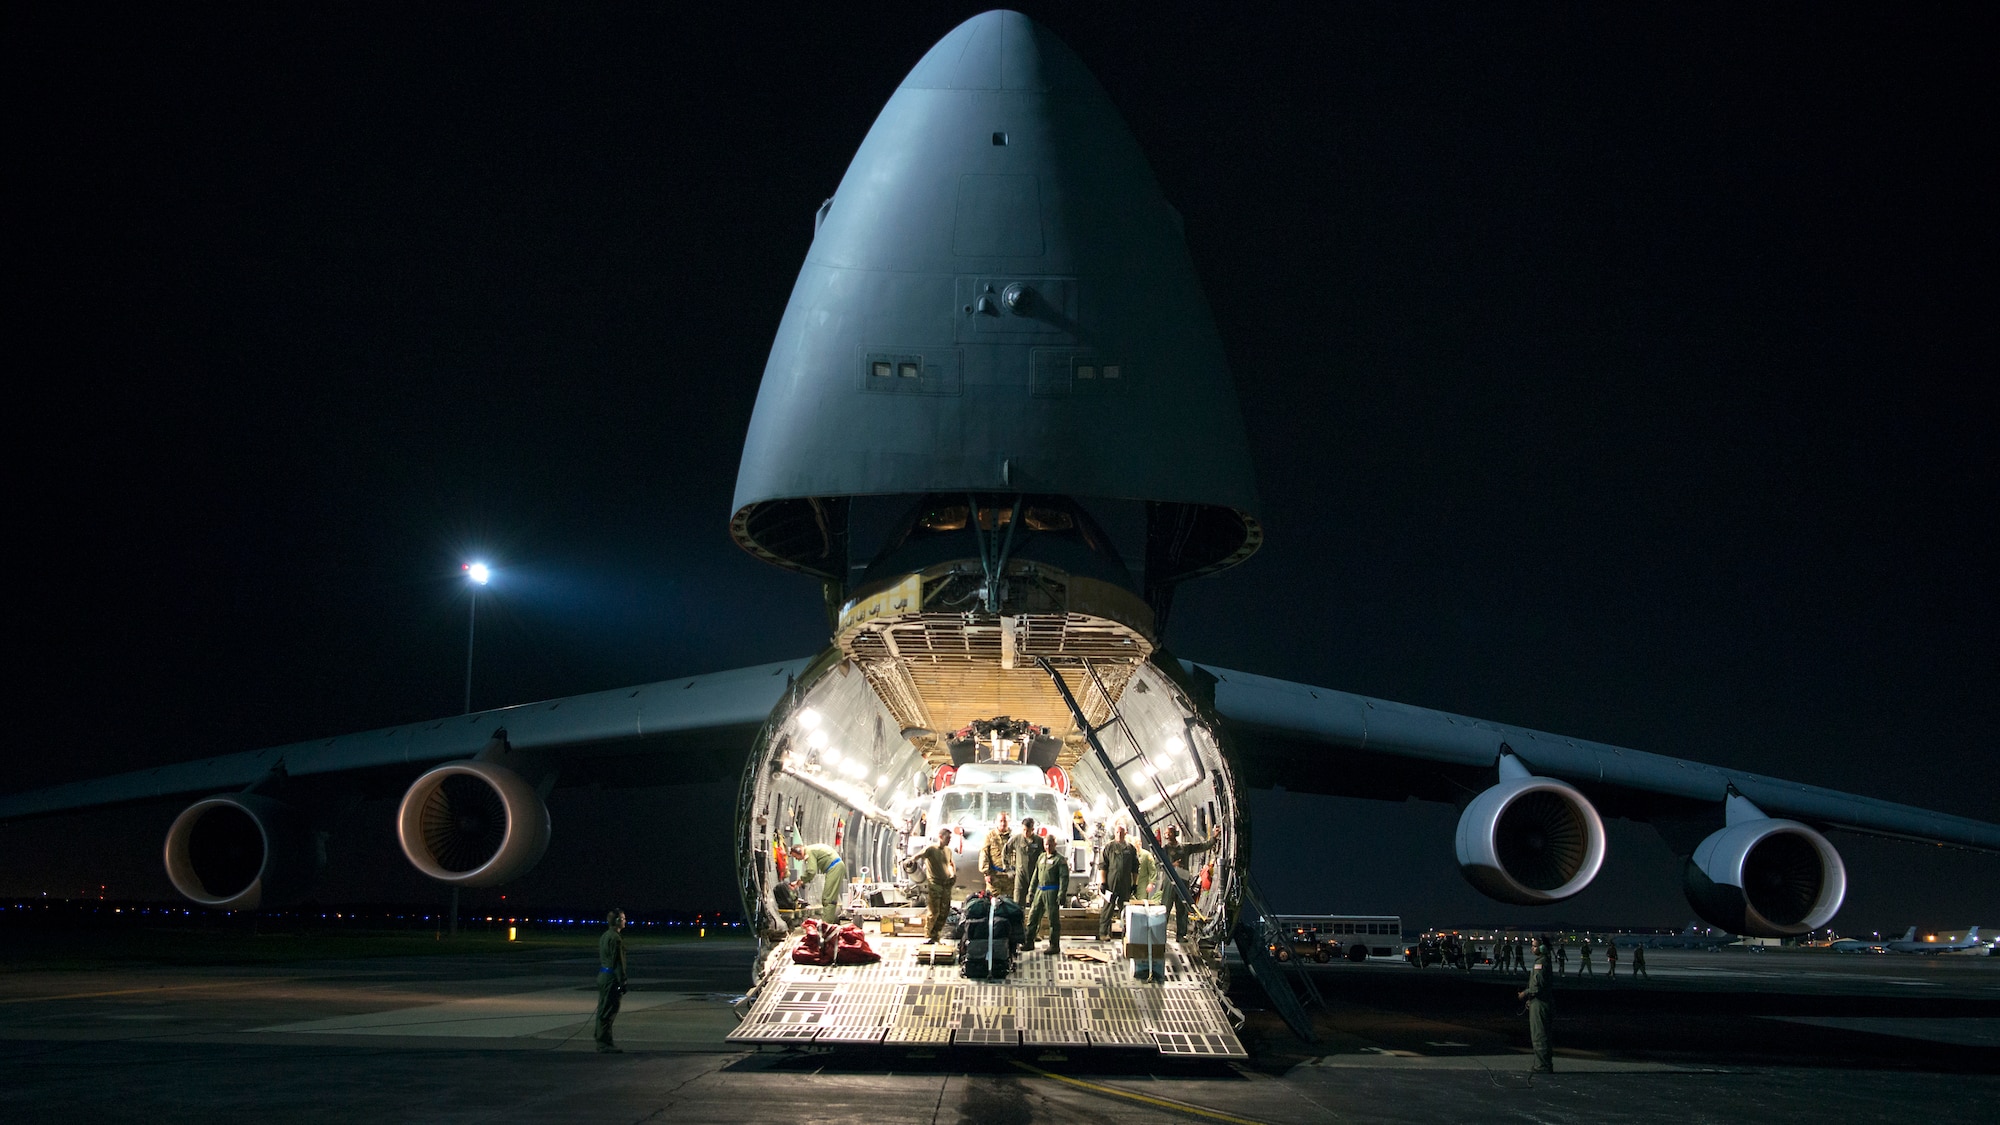 Aircrew prepare to unload an HH-60 Pave Hawk helicopter assigned to the 305th Rescue Squadron, Davis-Monthan Air Force Base, Ariz., from a C-5 Super Galaxy assigned to Dover Air Force Base, Del., at MacDill Air Force Base, Fla., Nov. 6, 2019.